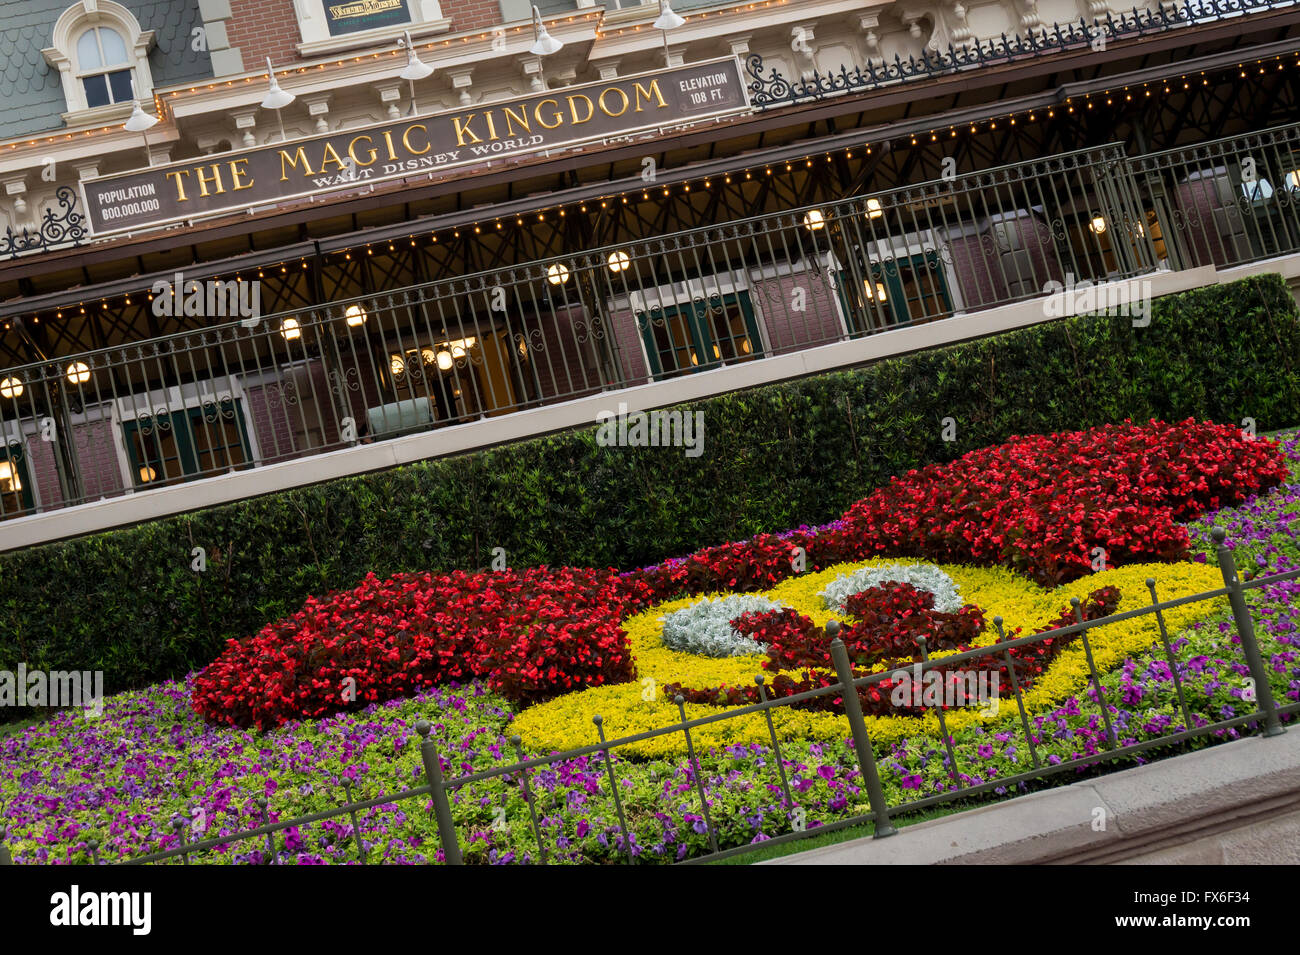 Entrance to the Magic Kingdom theme park, with Mickey Mouse Flowerbed, Stock Photo